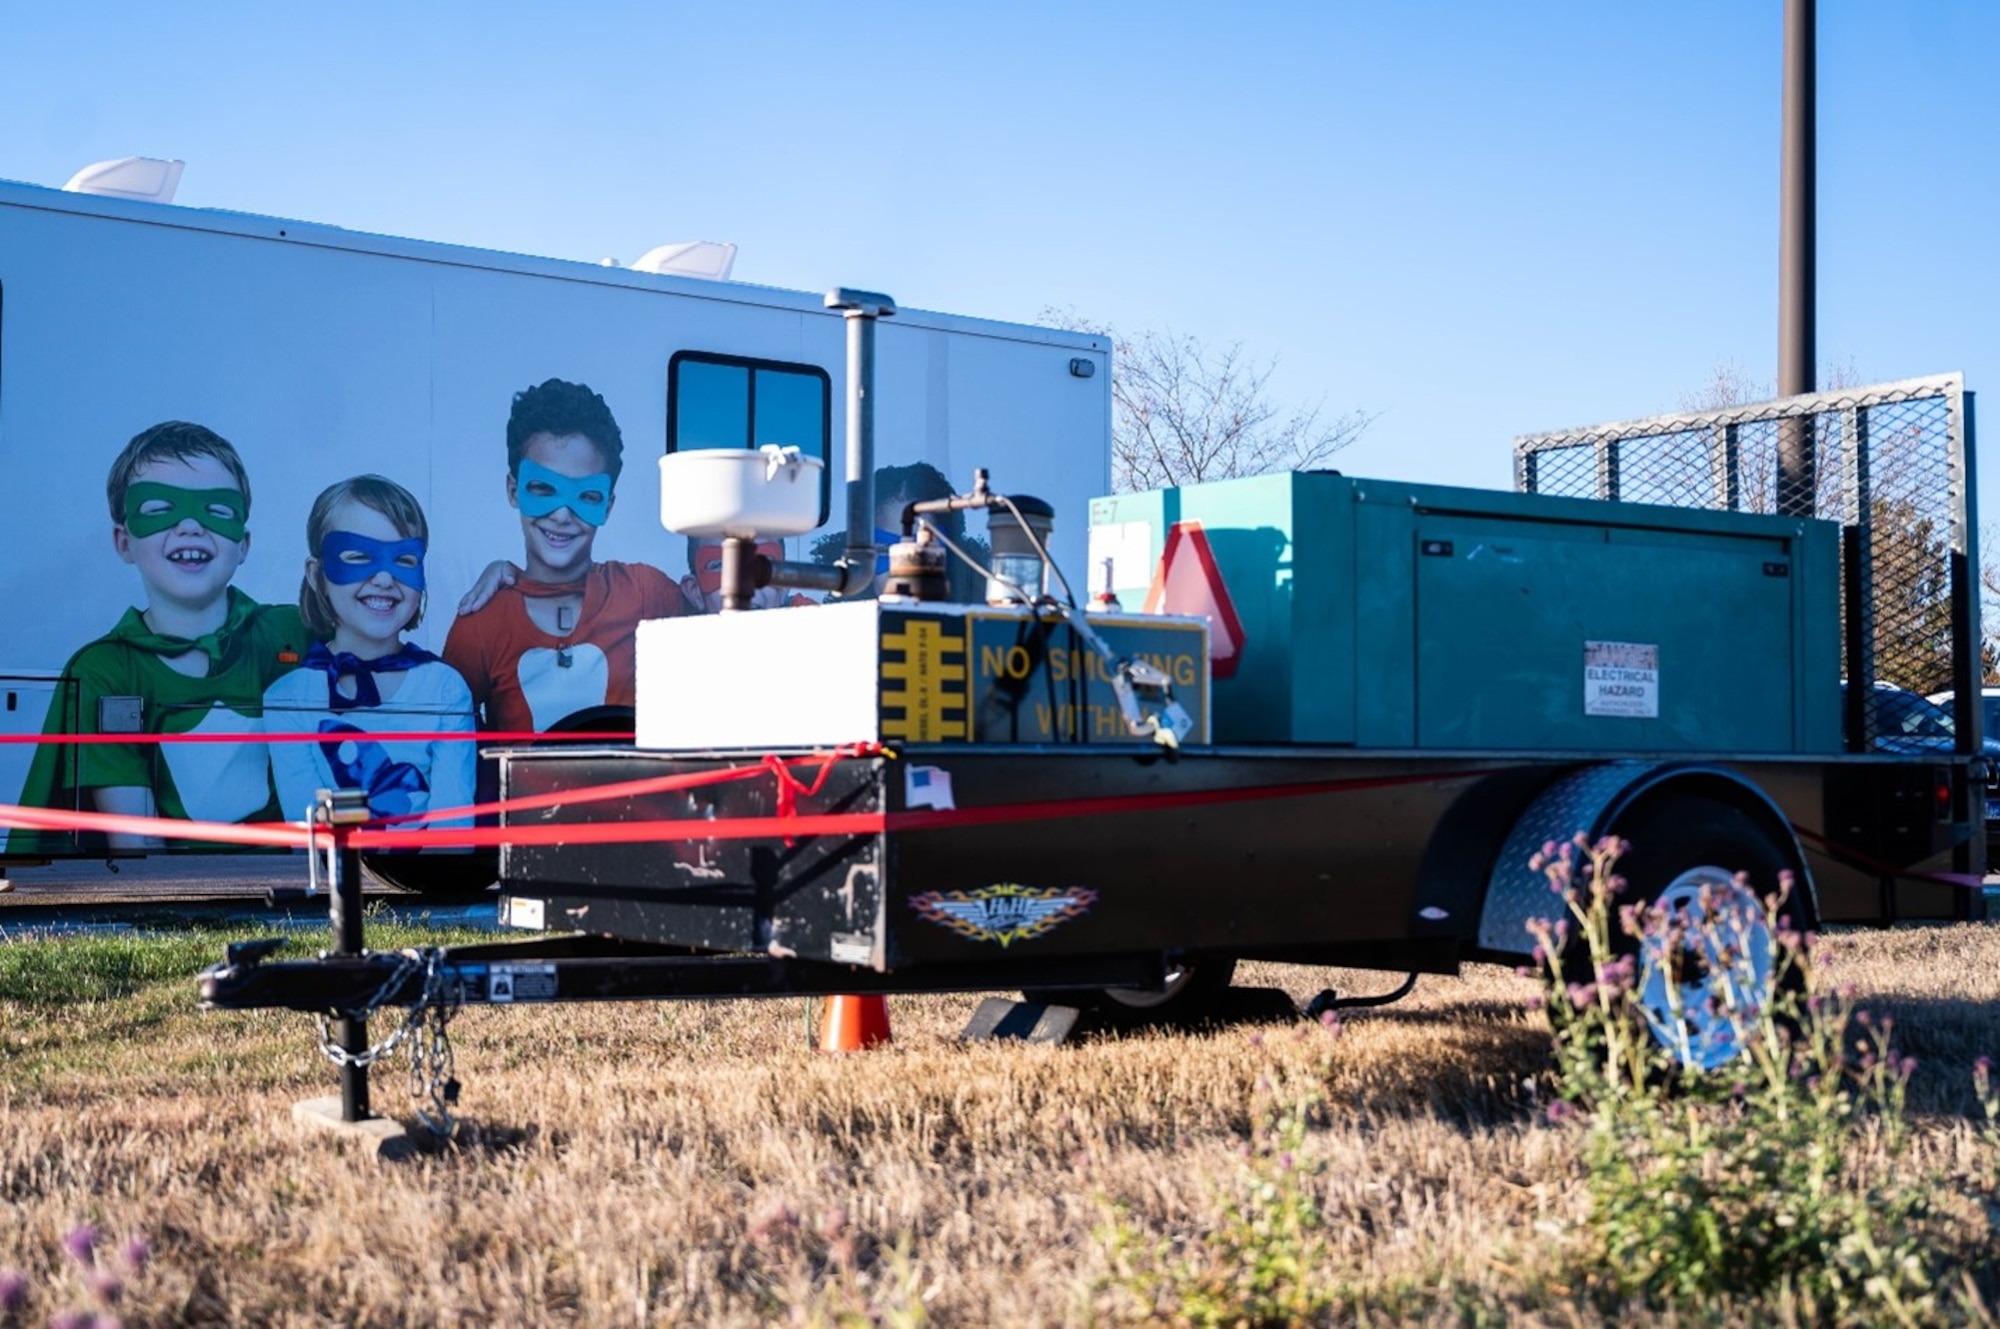 A generator belonging to the 28th Civil Engineer Squadron, sits outside a mobile dental truck providing free dental care to the children of Box Elder, S.D., Nov. 24, 2022.